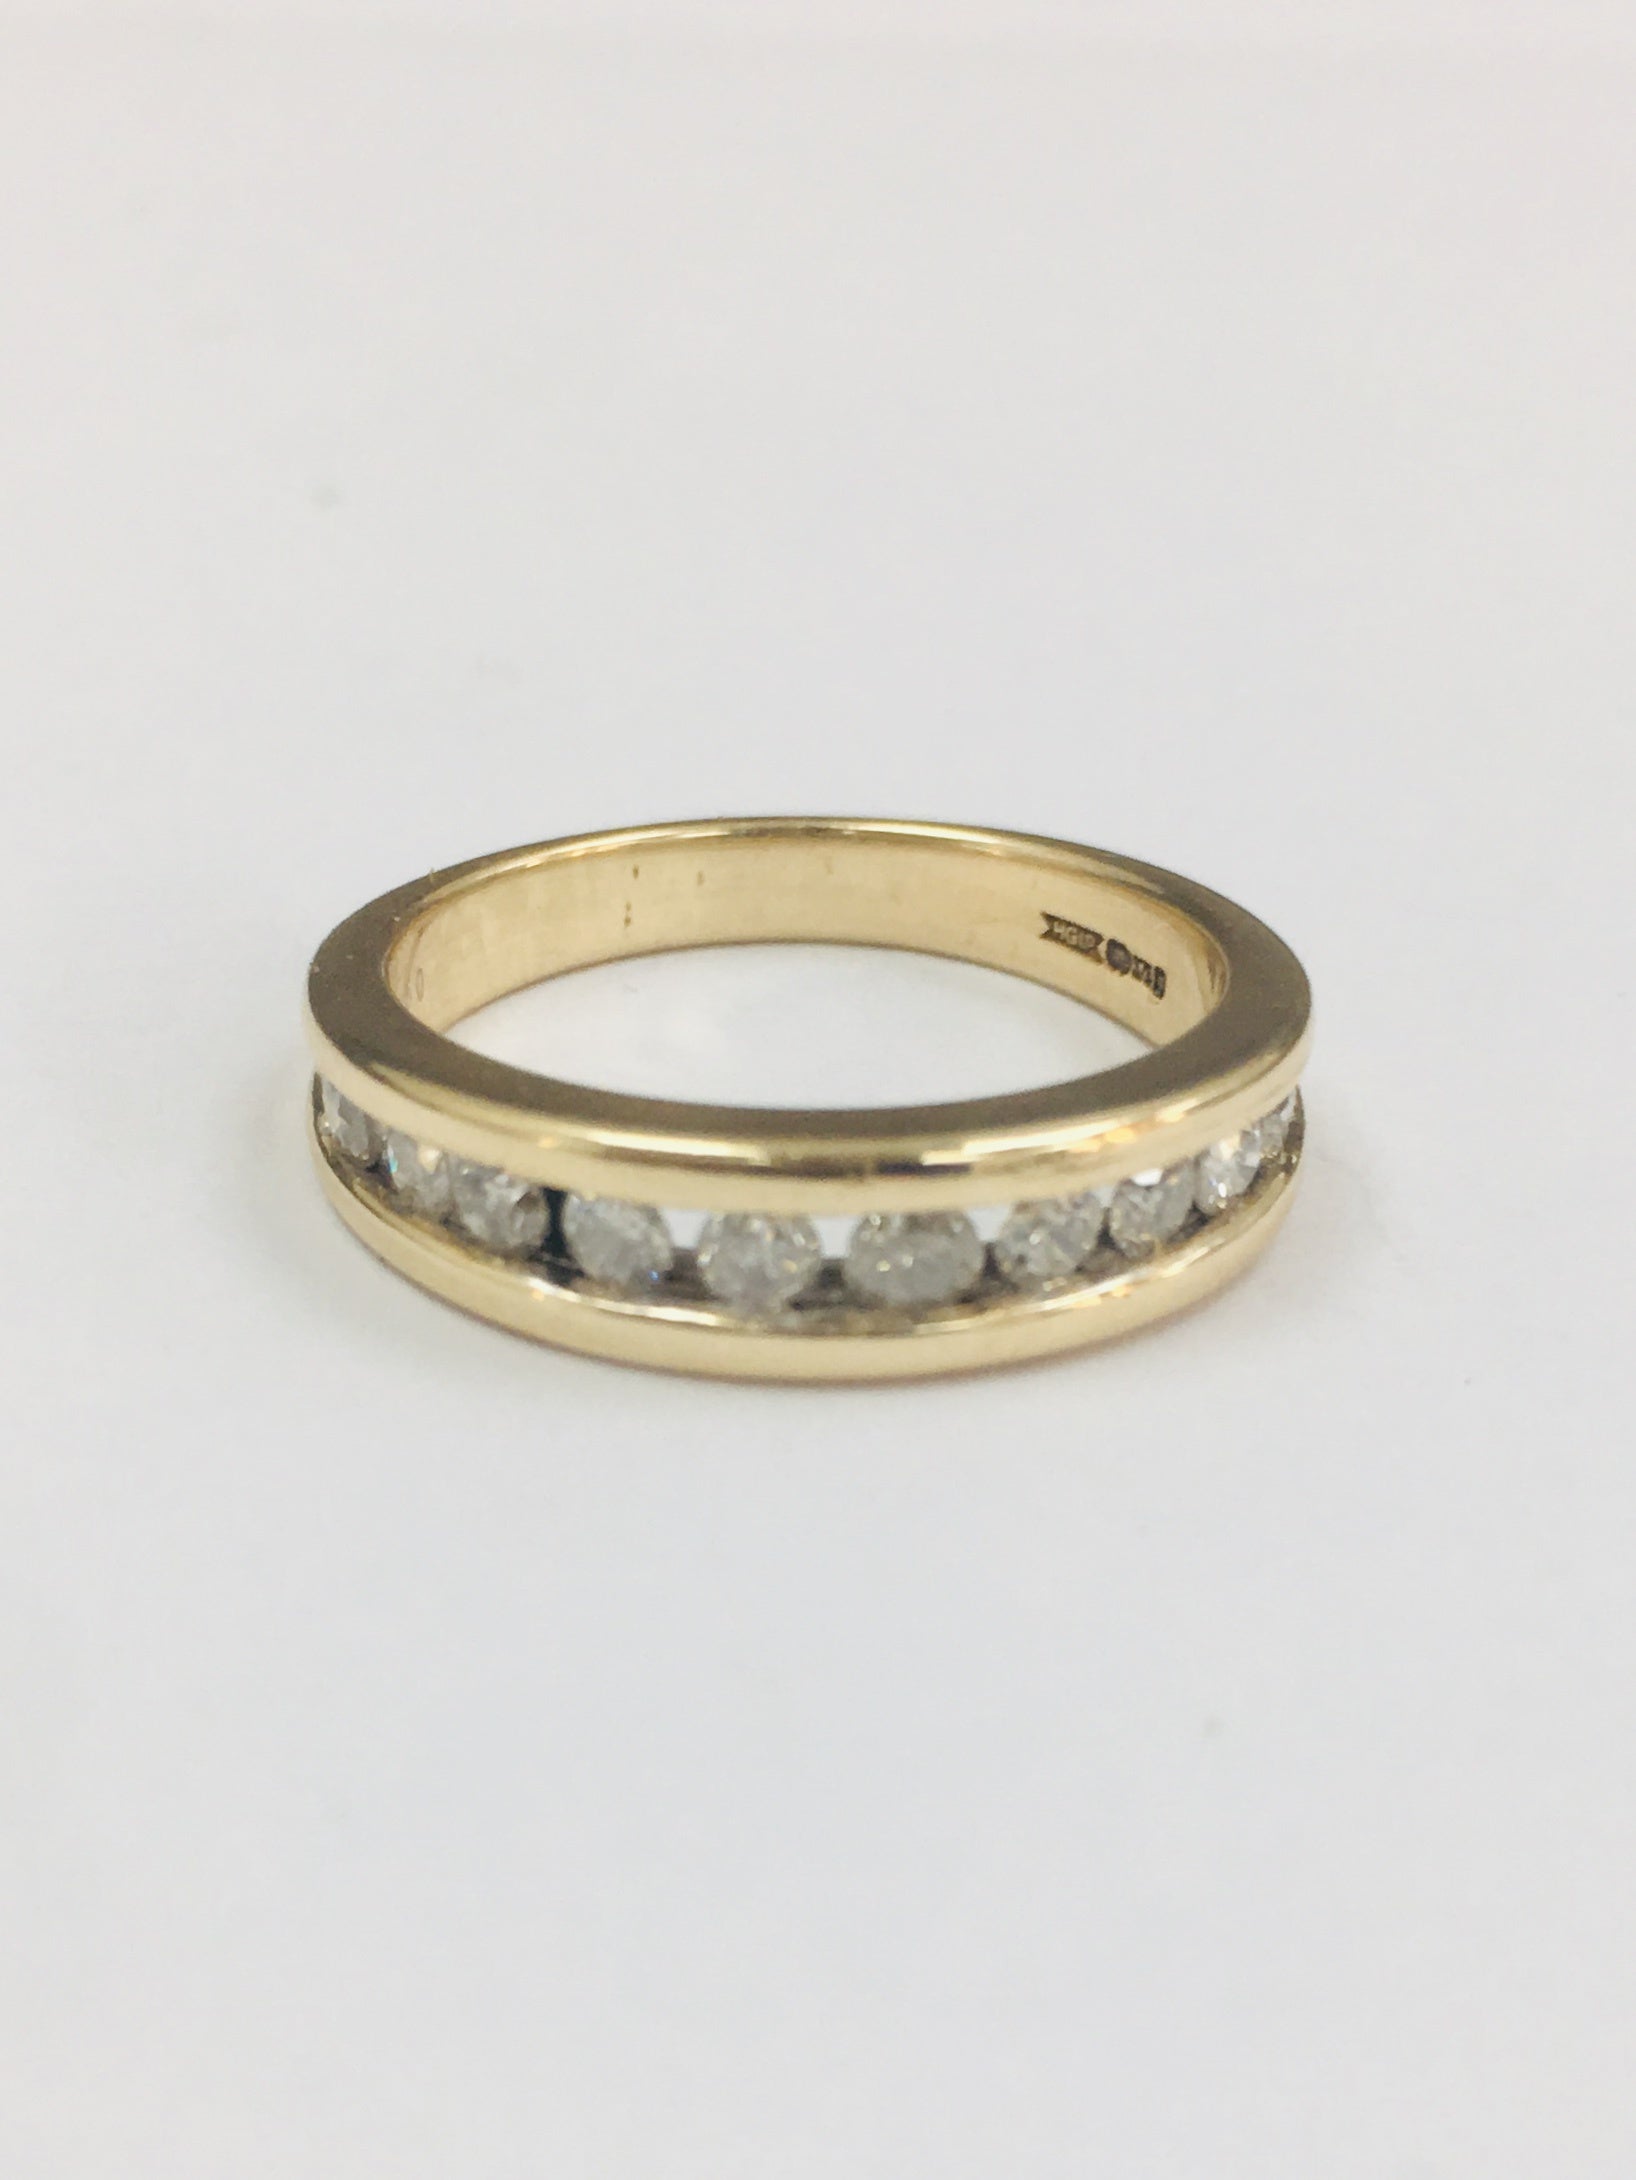 9ct Yellow Gold Eleven Stone Eternity Ring. 0.33cts